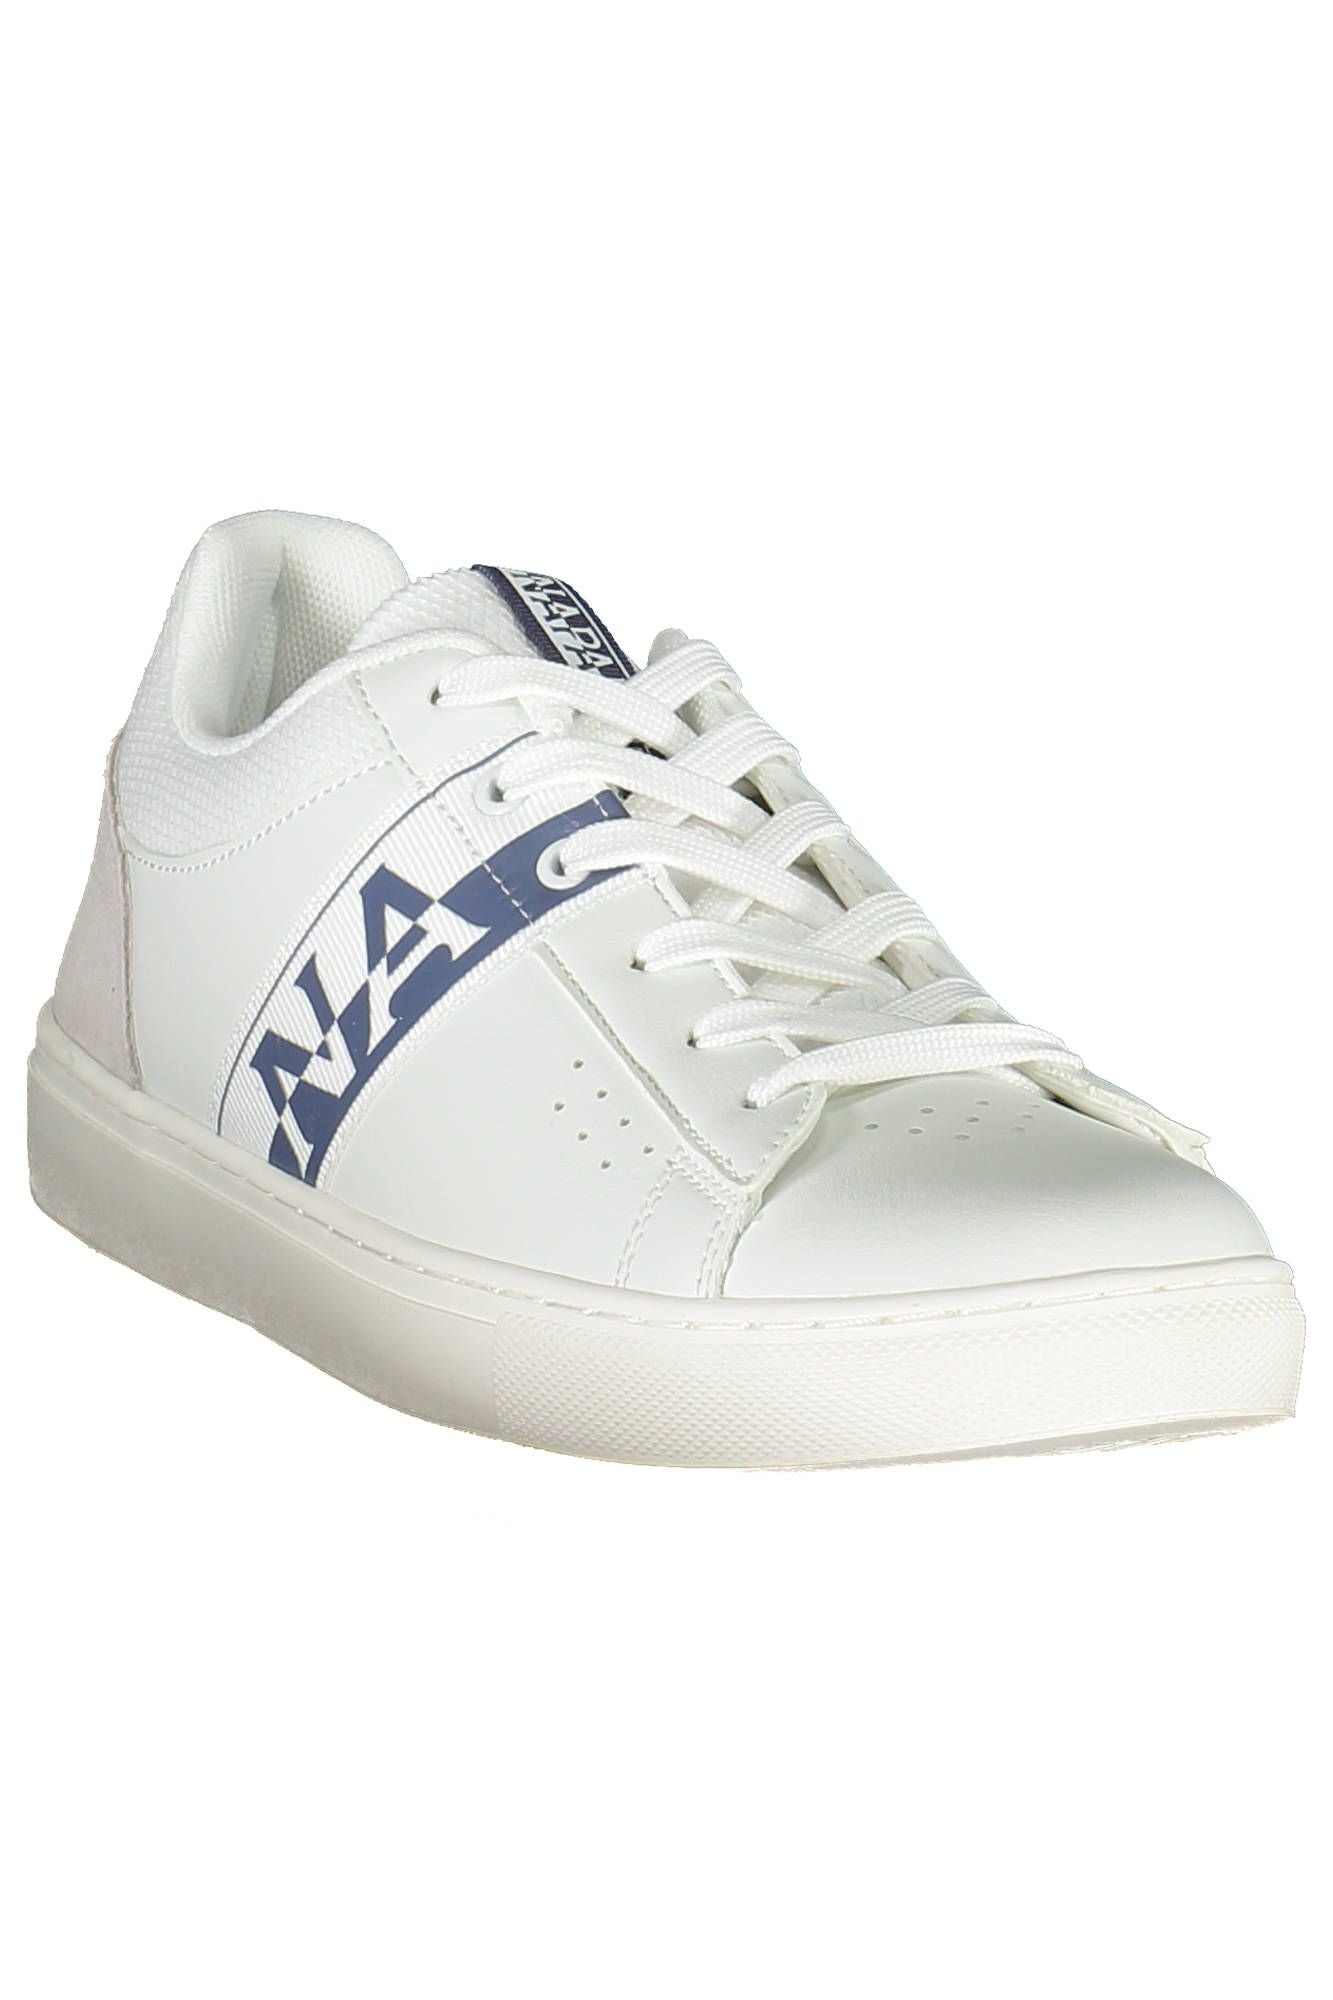 Chic White Lace-Up Sneakers with Logo Accent